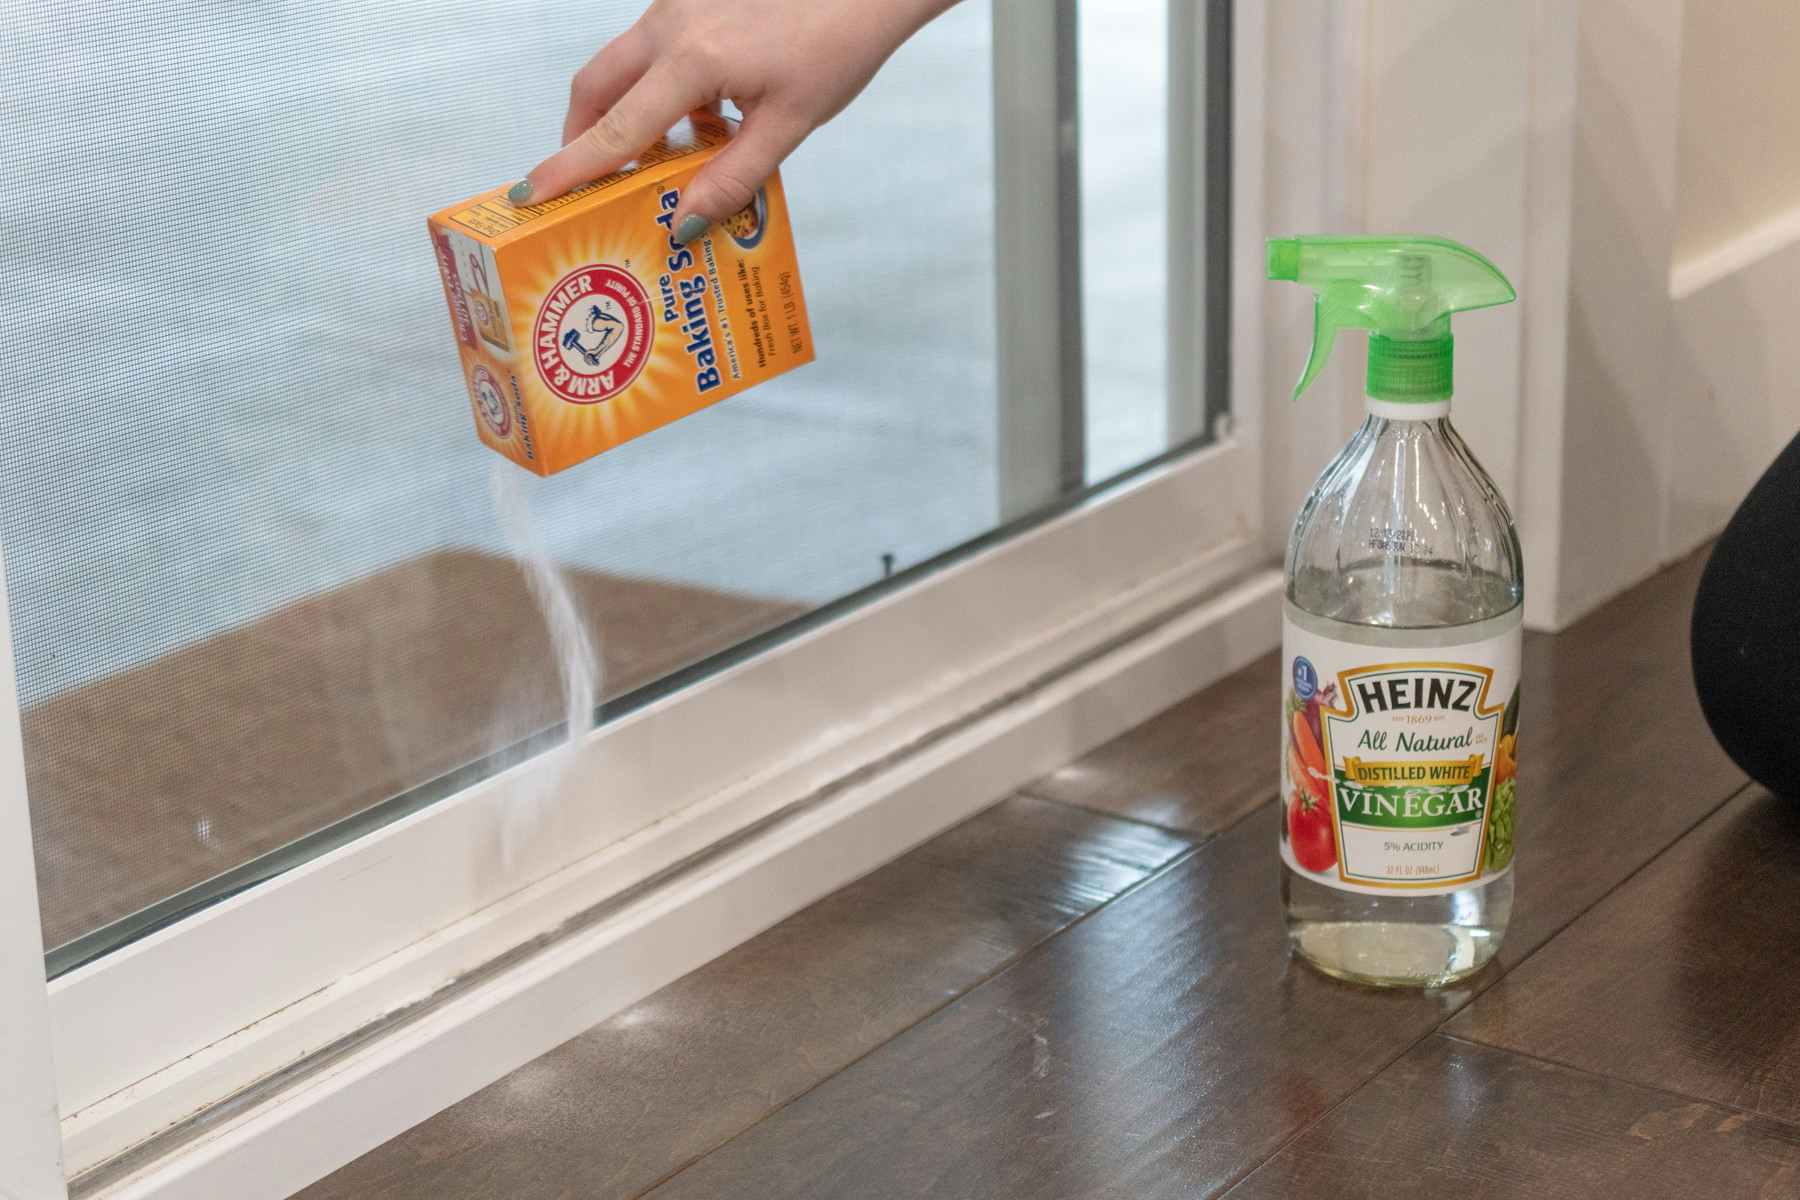 https://prod-cdn-thekrazycouponlady.imgix.net/wp-content/uploads/2019/01/20190117-kcl-cleaning-tips-for-the-new-year-baking-soda-vinegar-window-tracks-01-1548023196.jpg?auto=format&fit=fill&q=25